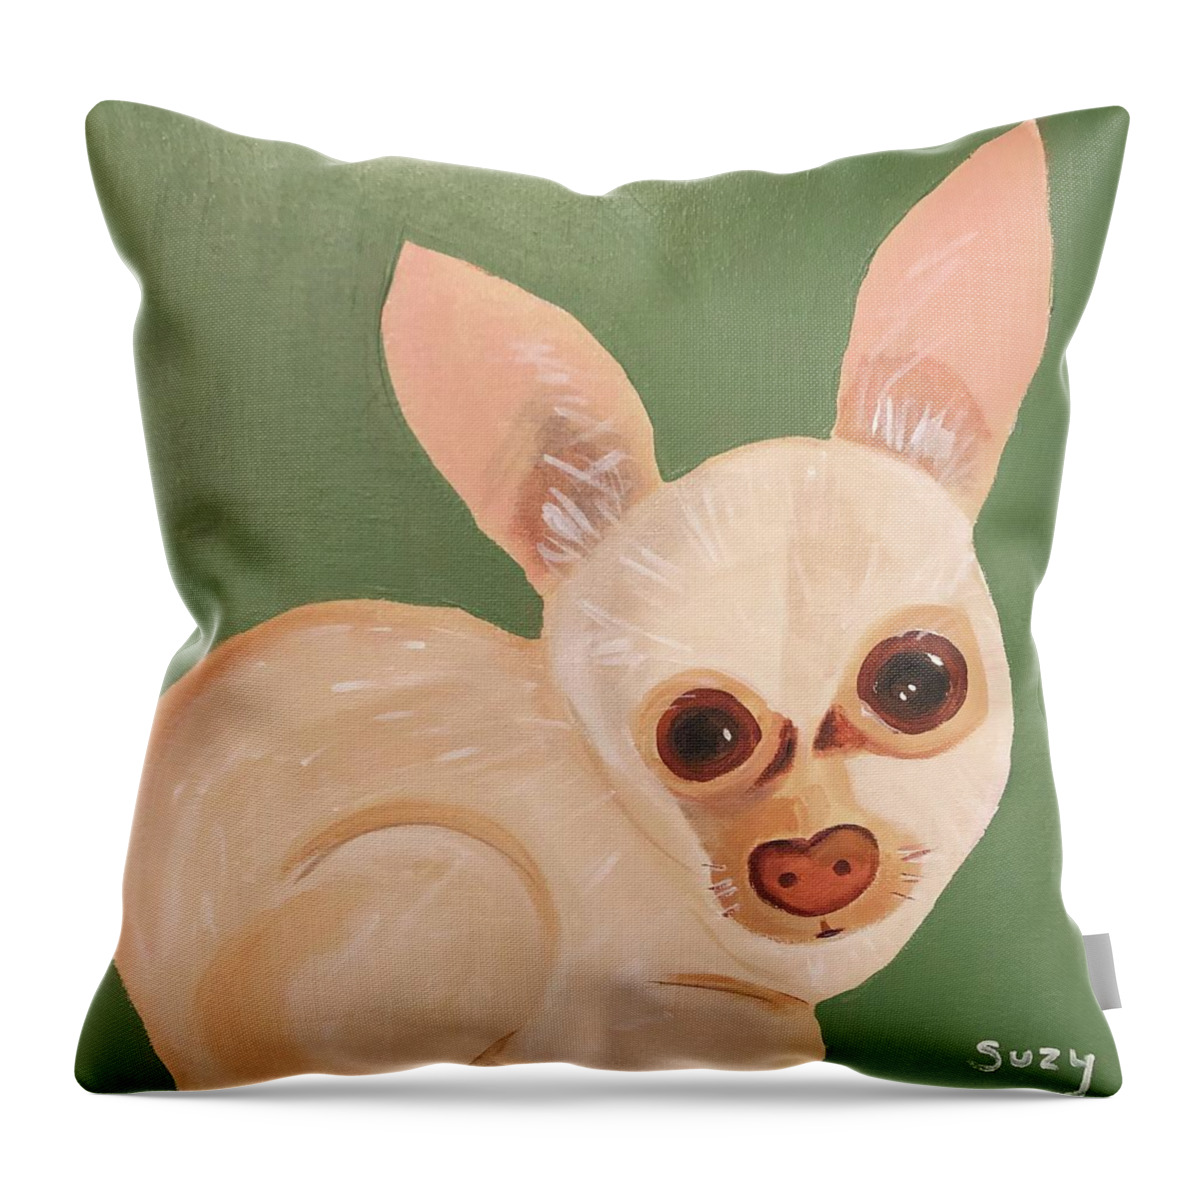 Suzymandelcanter Throw Pillow featuring the painting Sippy by Suzy Mandel-Canter